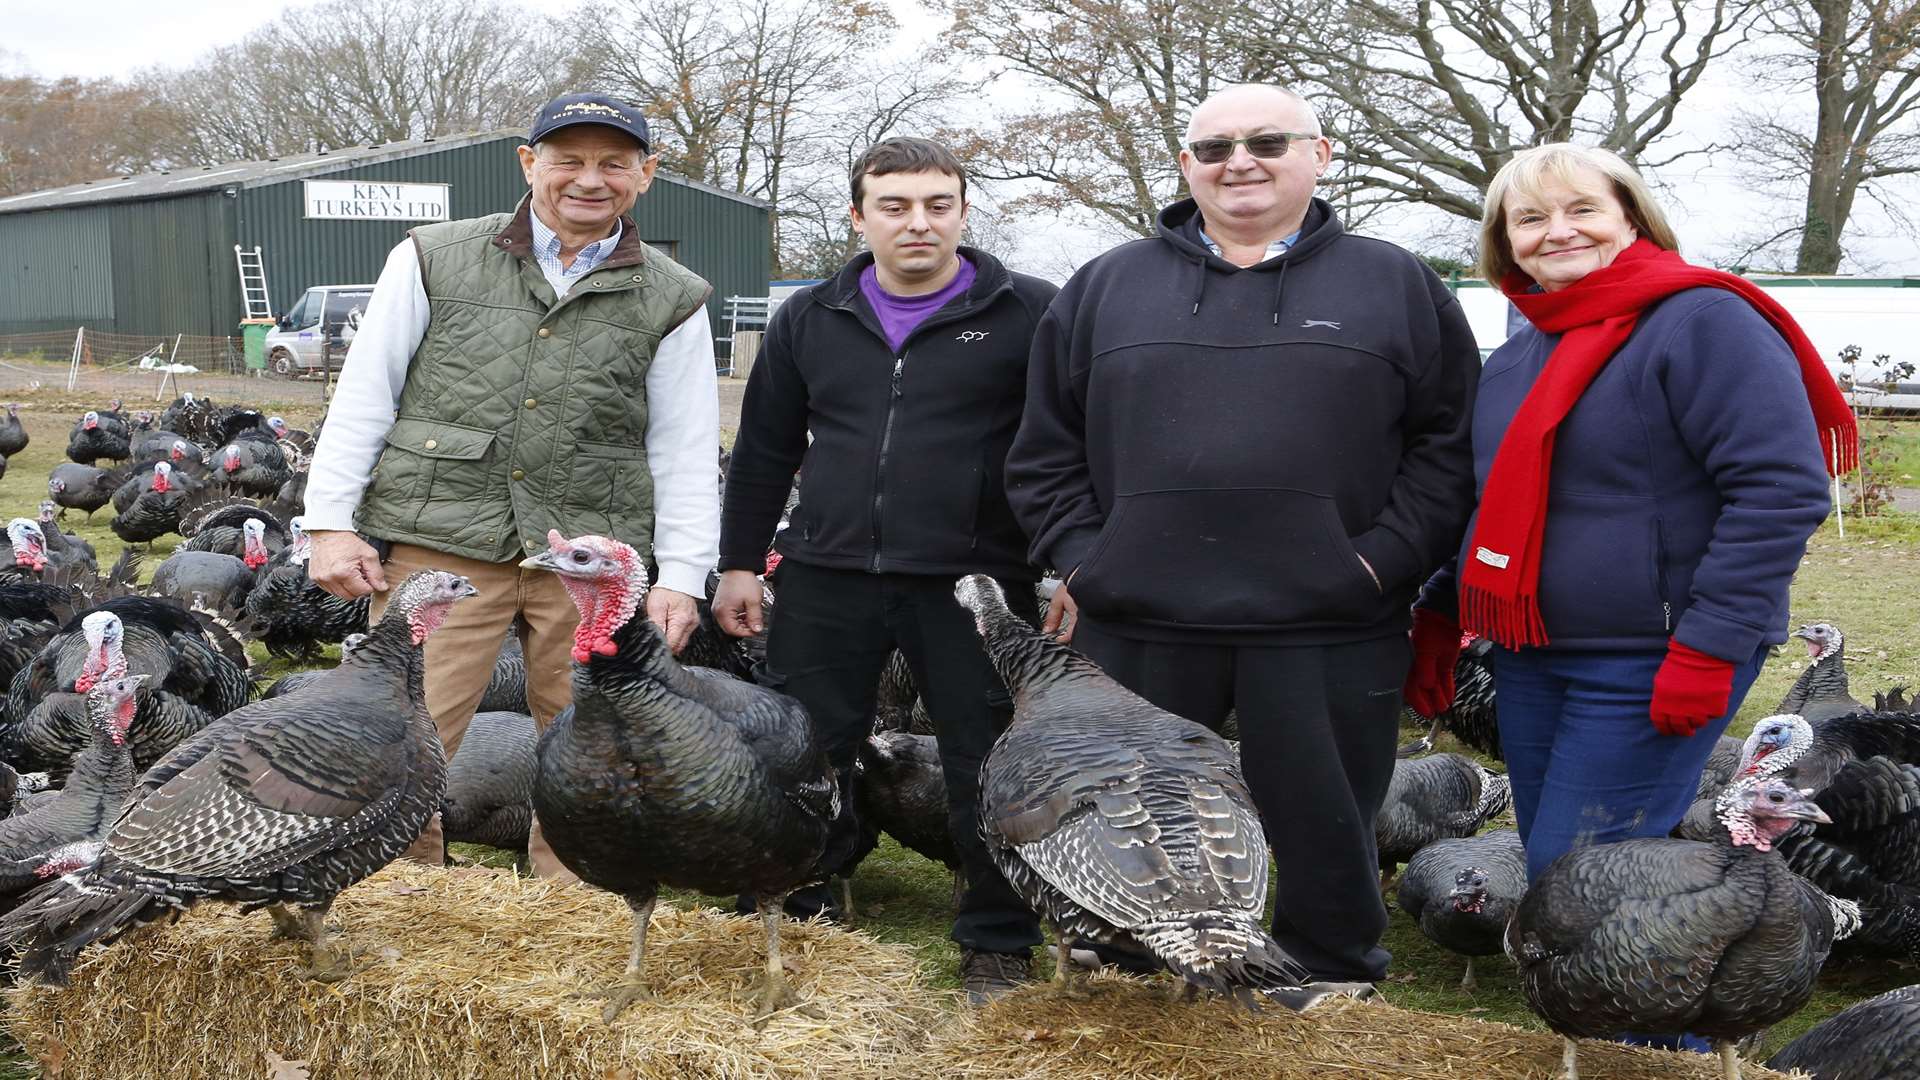 Kent Turkeys donating turkeys for homeless for You Can Help, KM appeal. From Left: Pictured are Tony Fleck, Vasko Spasov from Kent Turkeys with Dave Holland & Angela Clay from Homeless Care